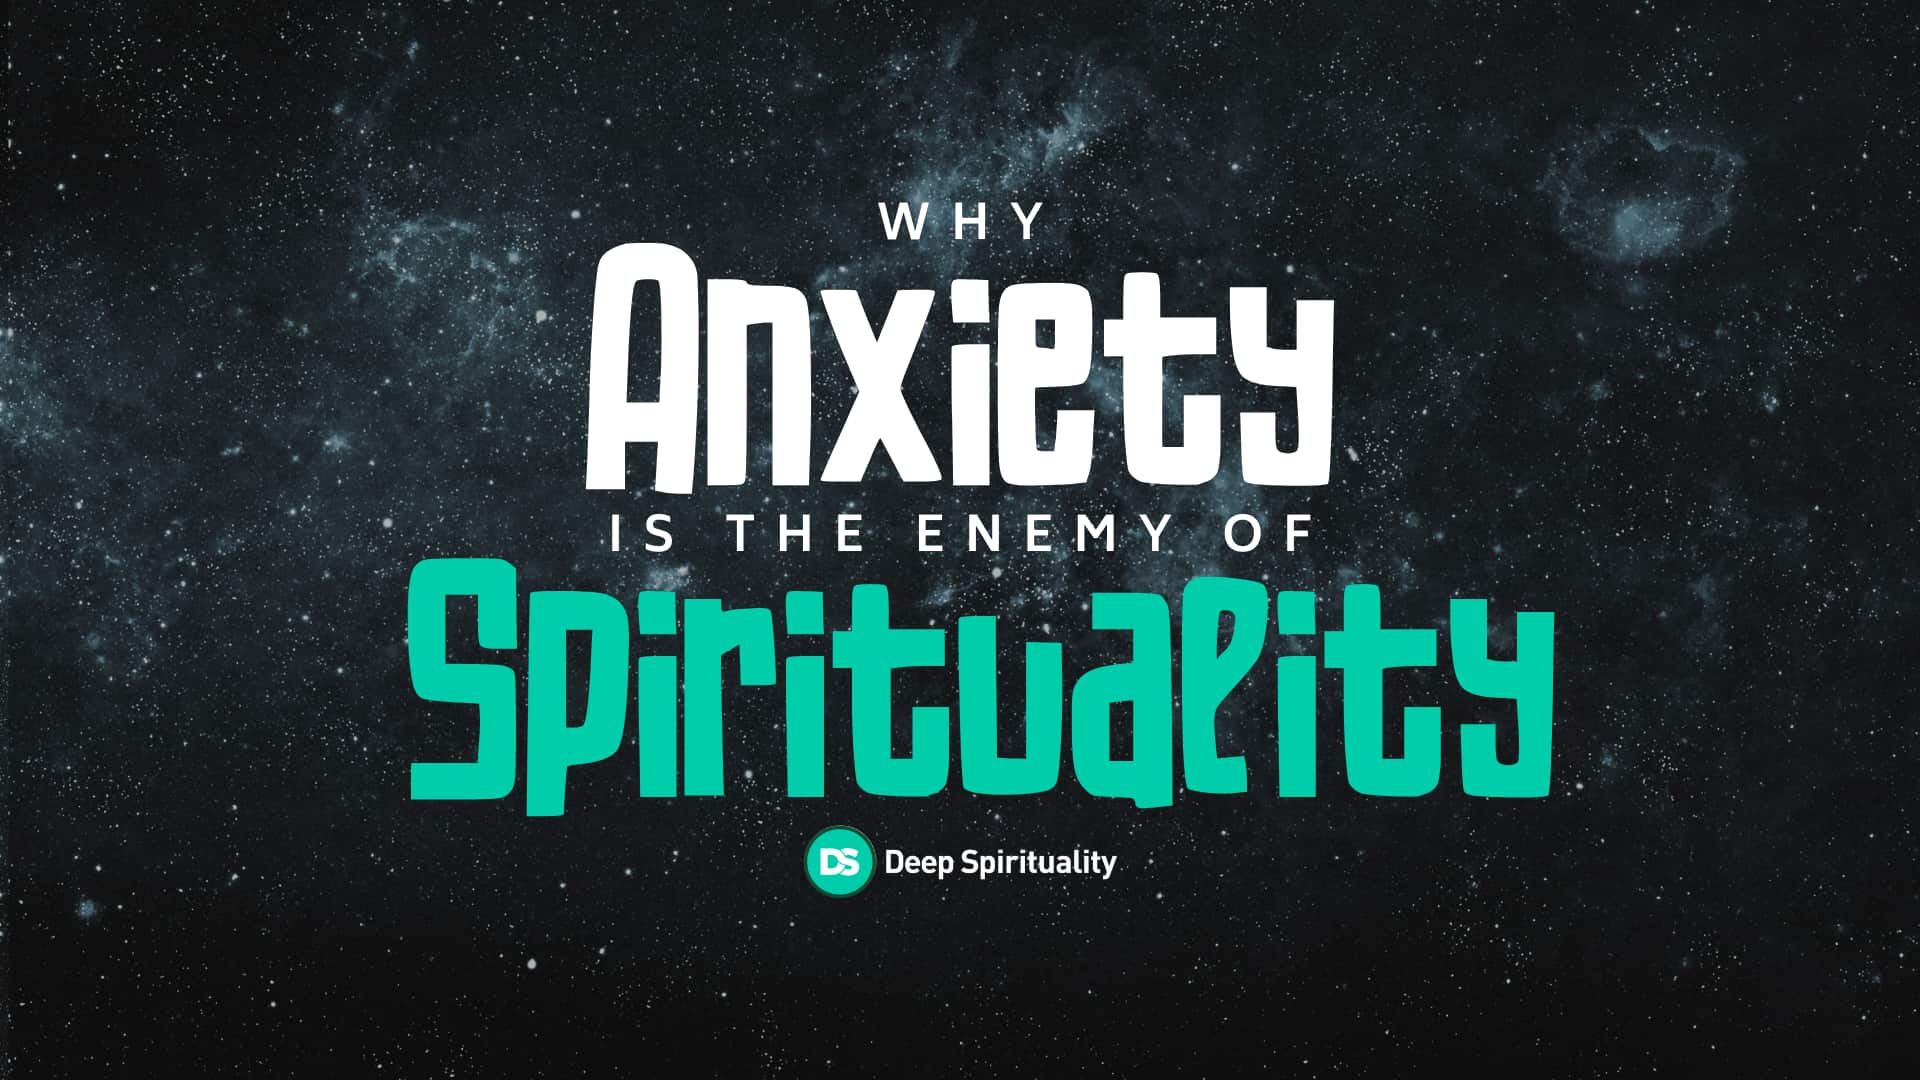 Why Anxiety is the Enemy of Spirituality 2